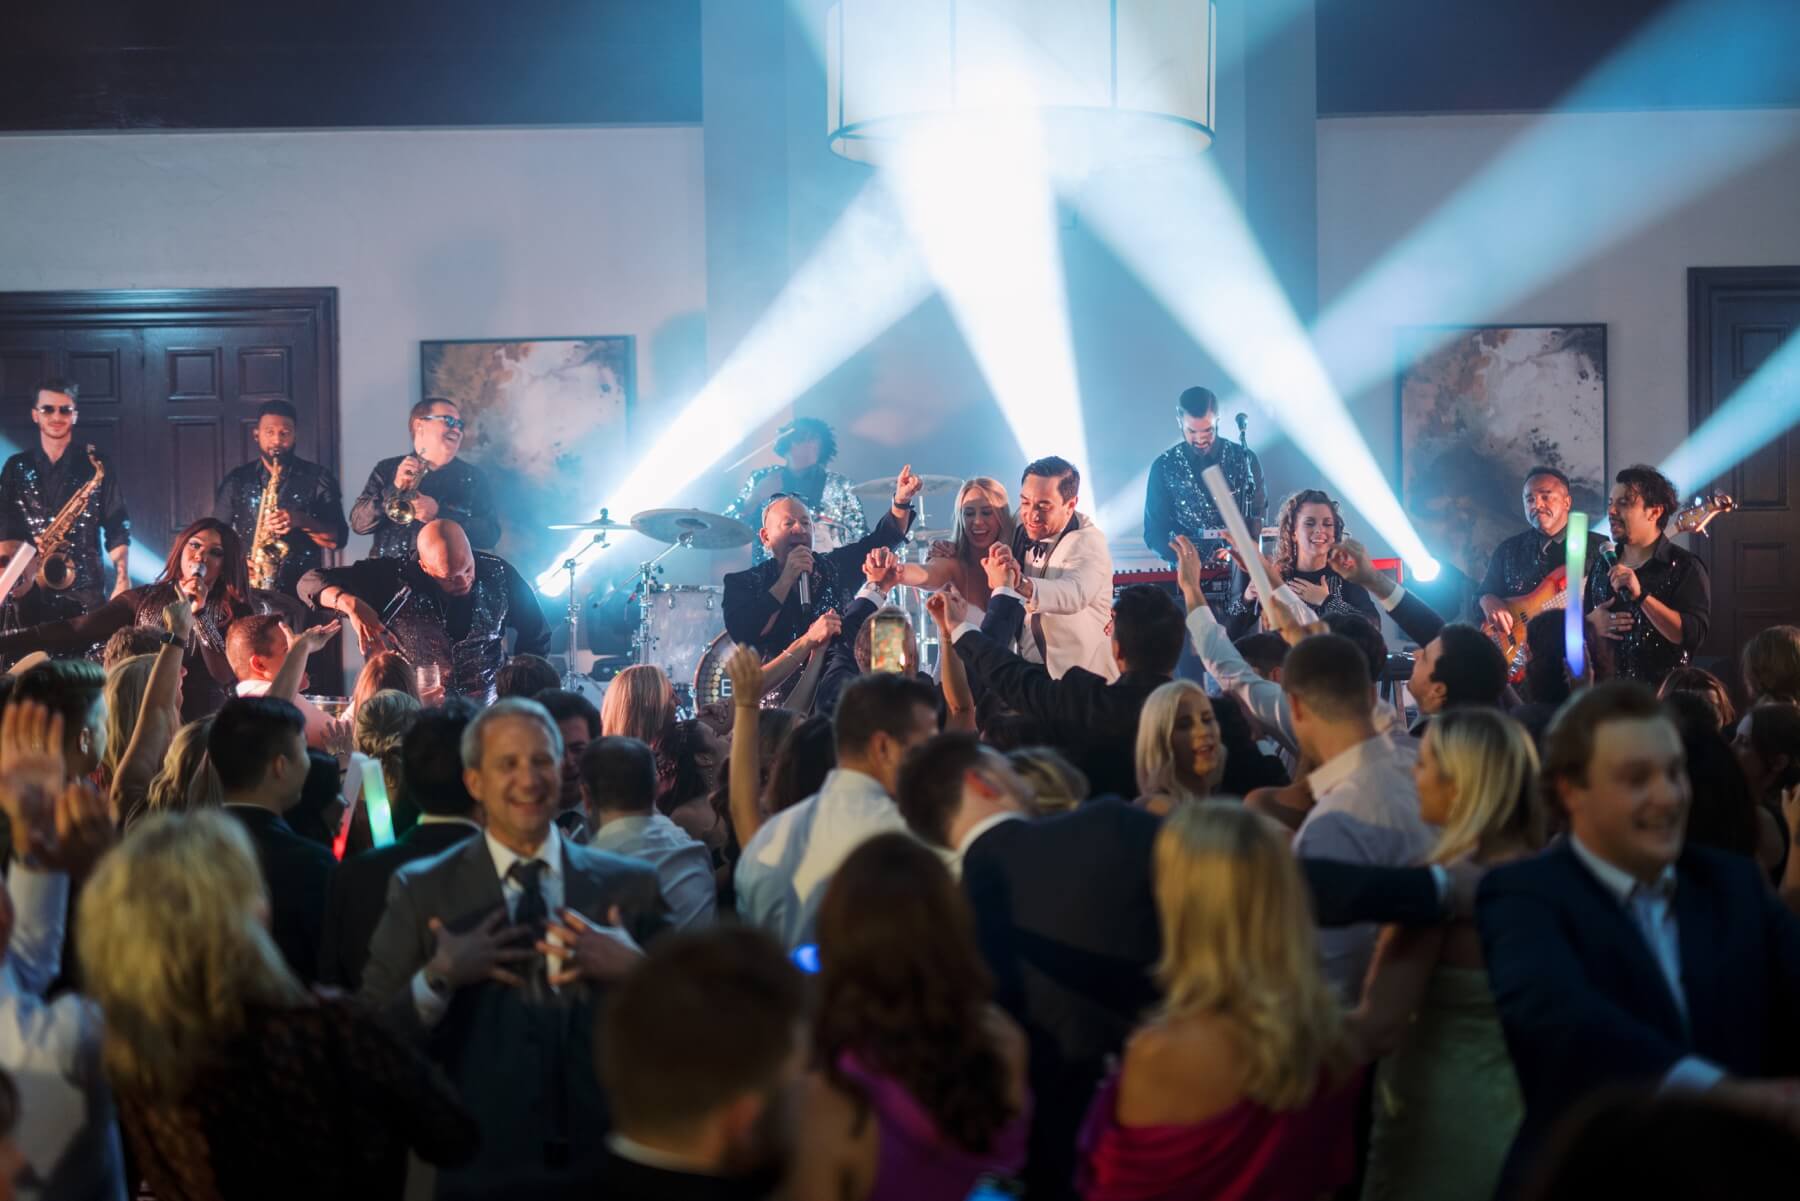 Couple dancing on stage with band during wedding reception